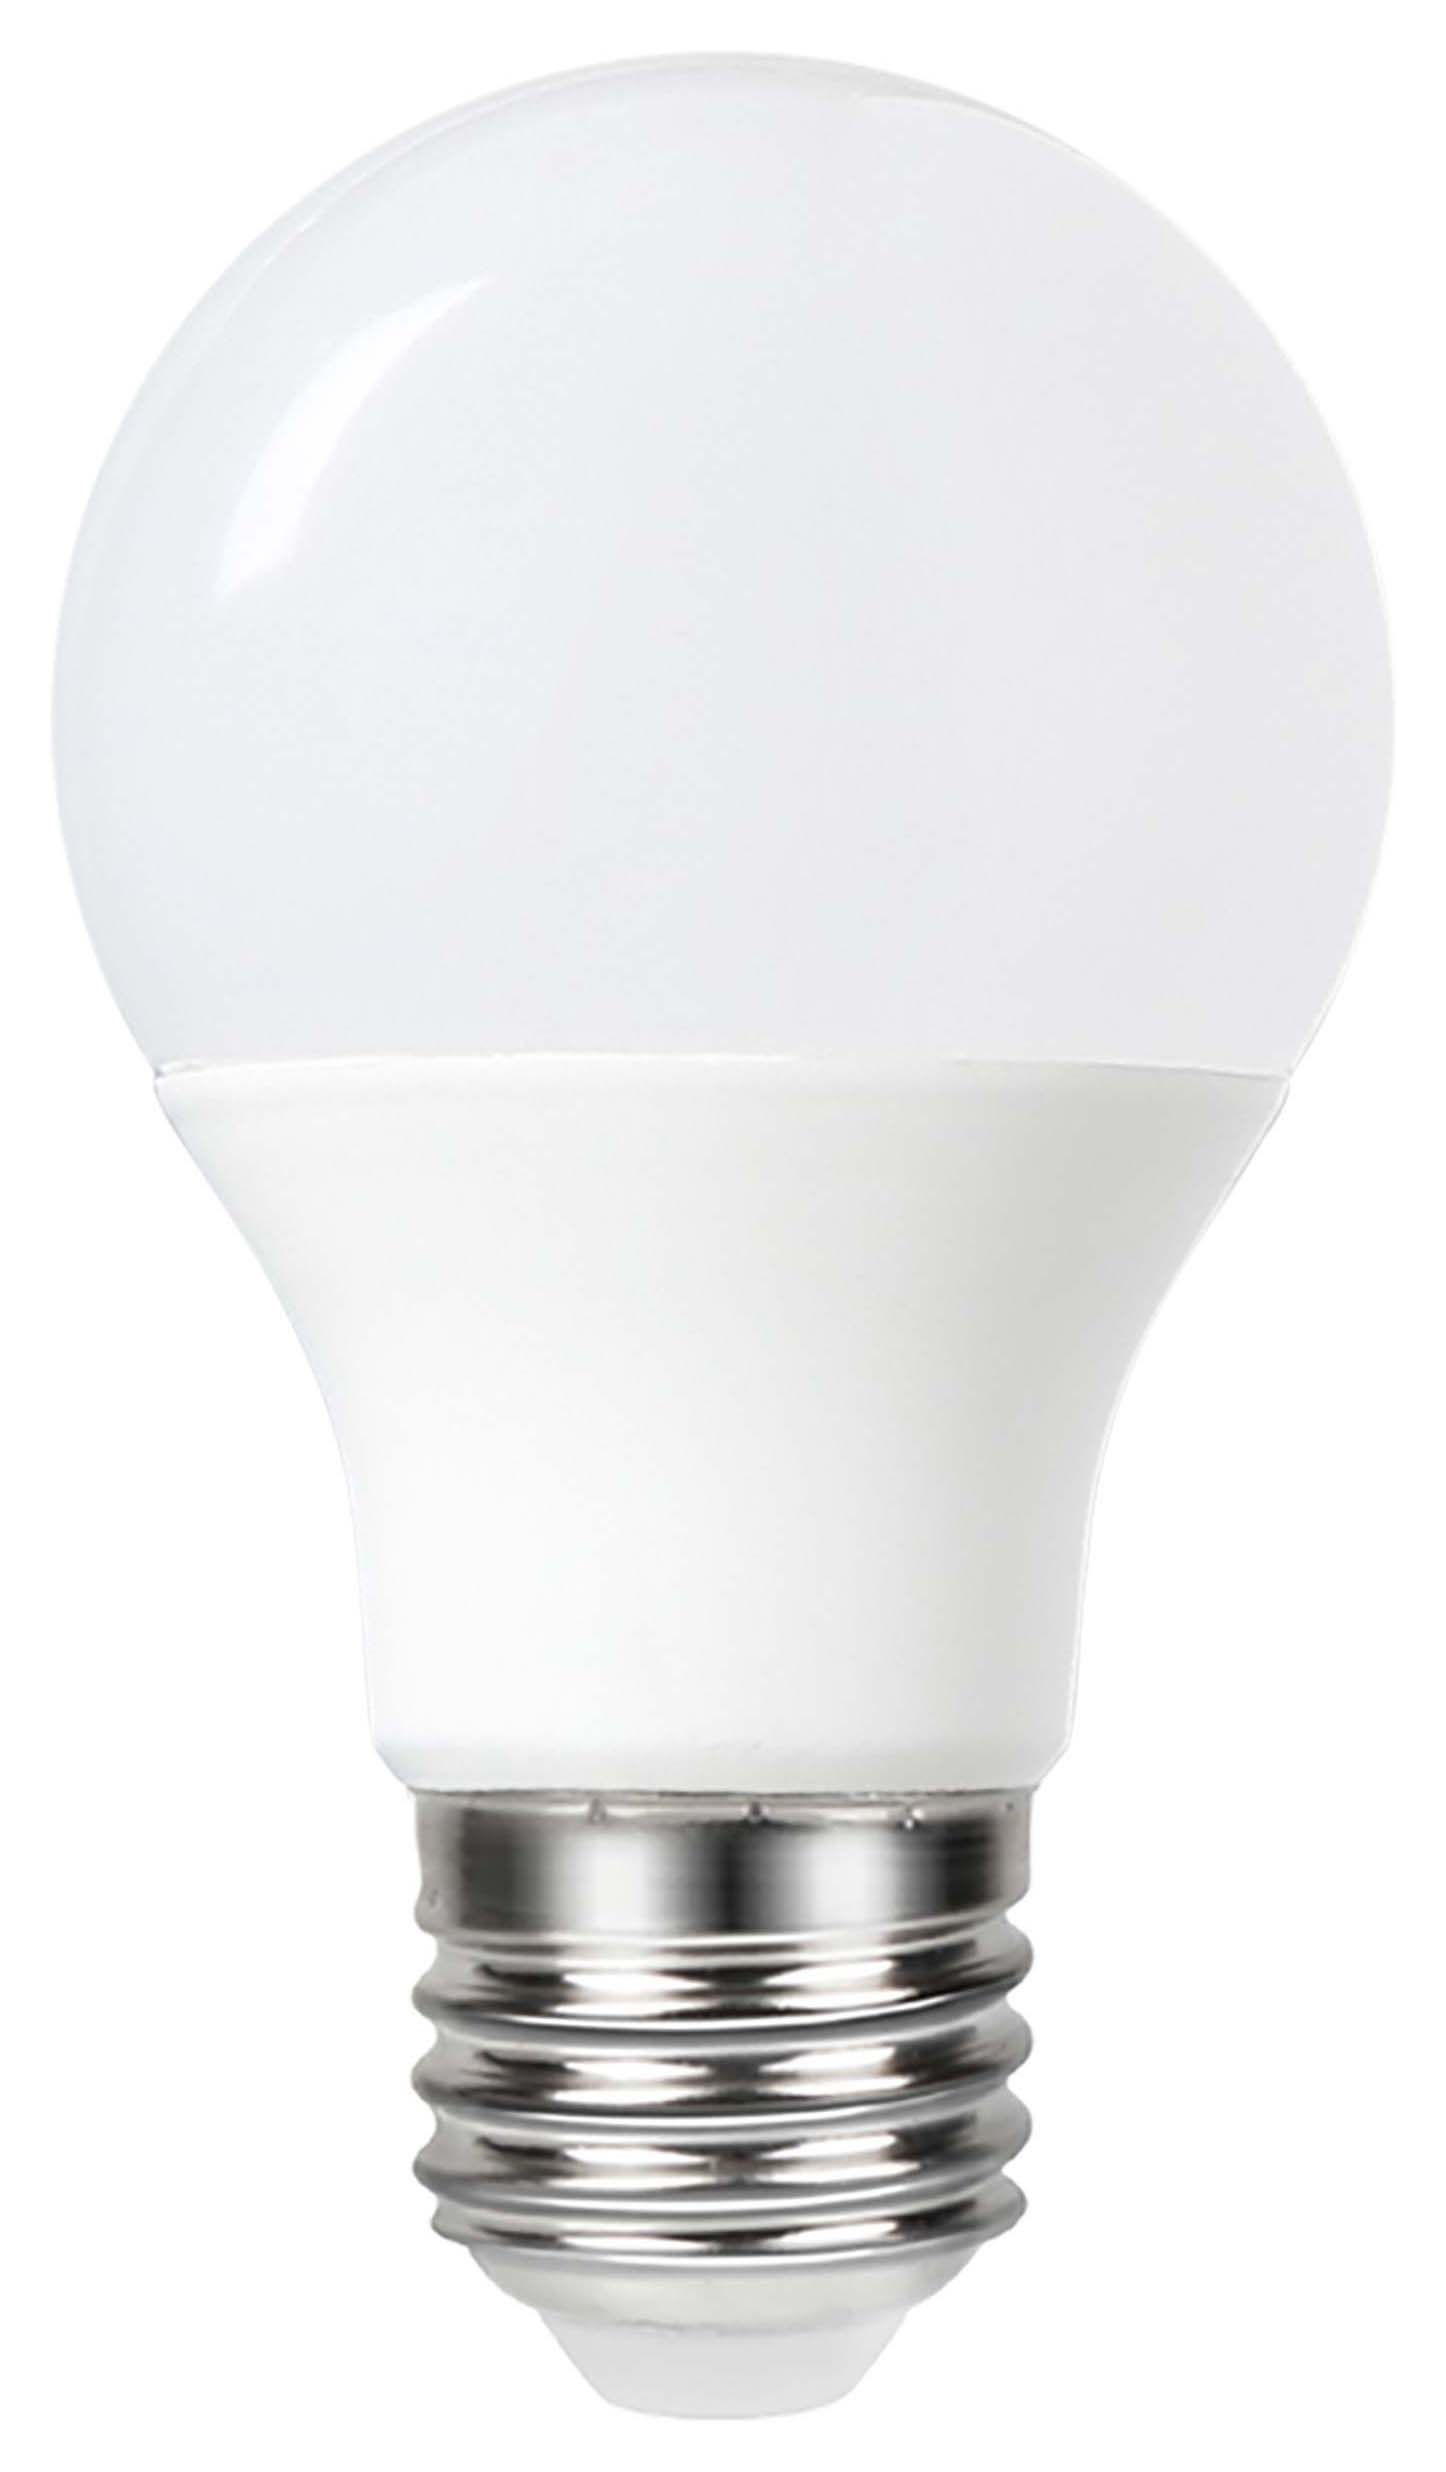 Image of Wickes Non-Dimmable GLS Opal LED E27 13.8W Warm White Light Bulb